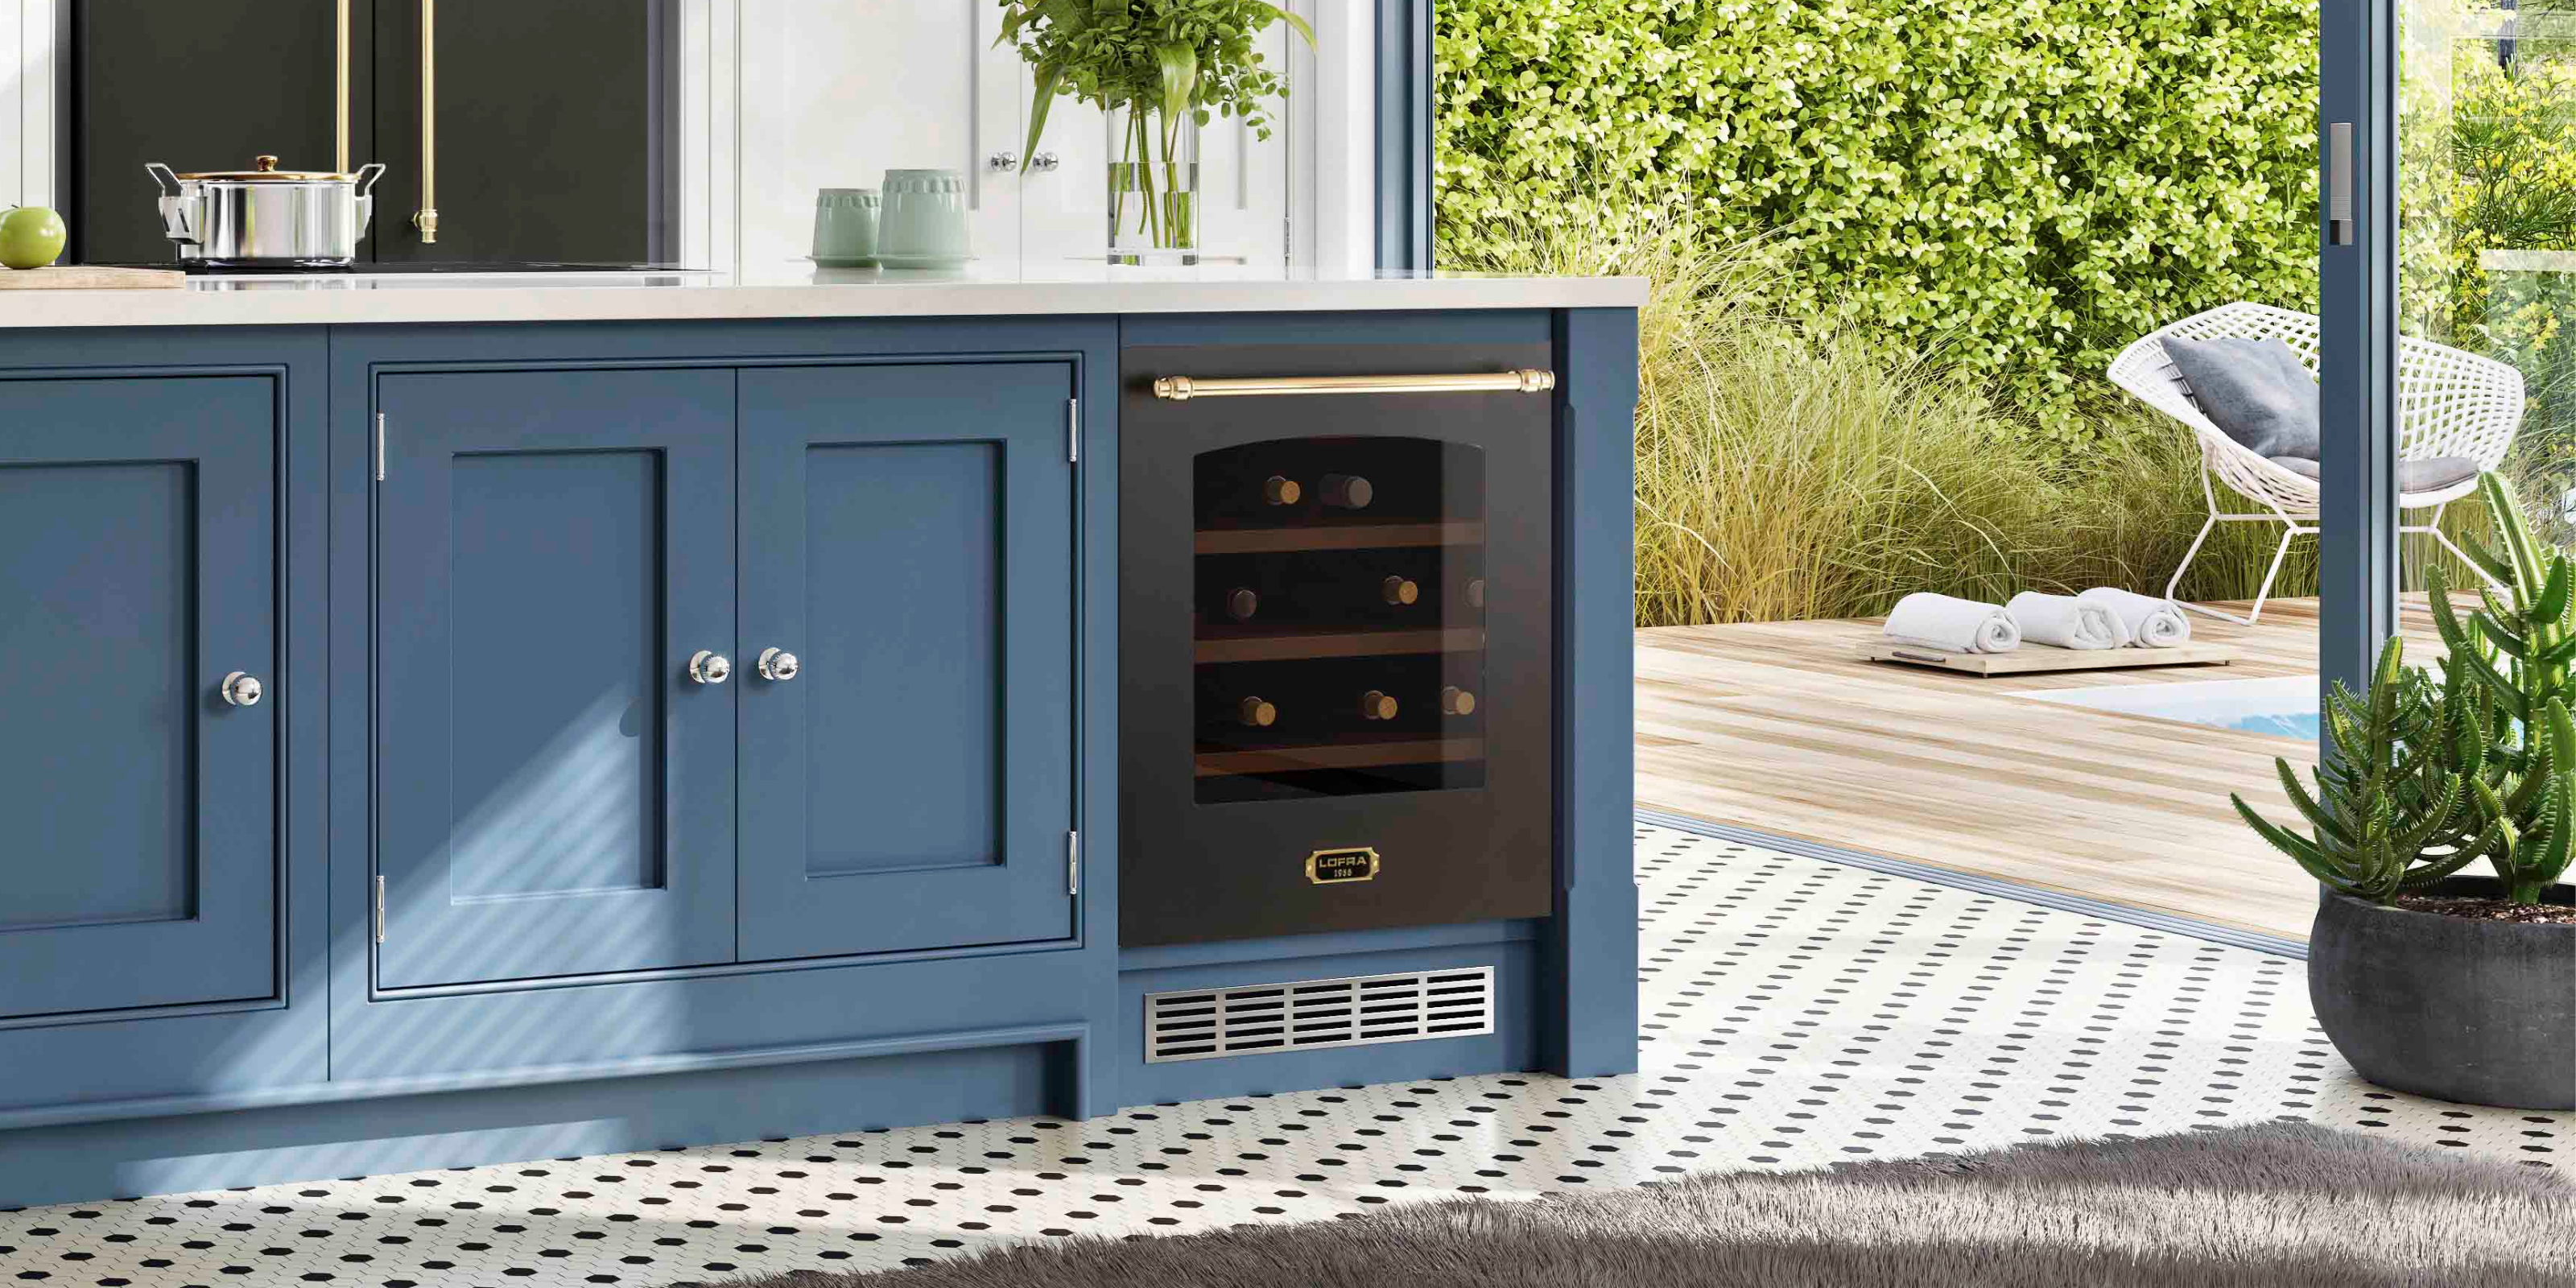 Wine Coolers - Lofra Cookers